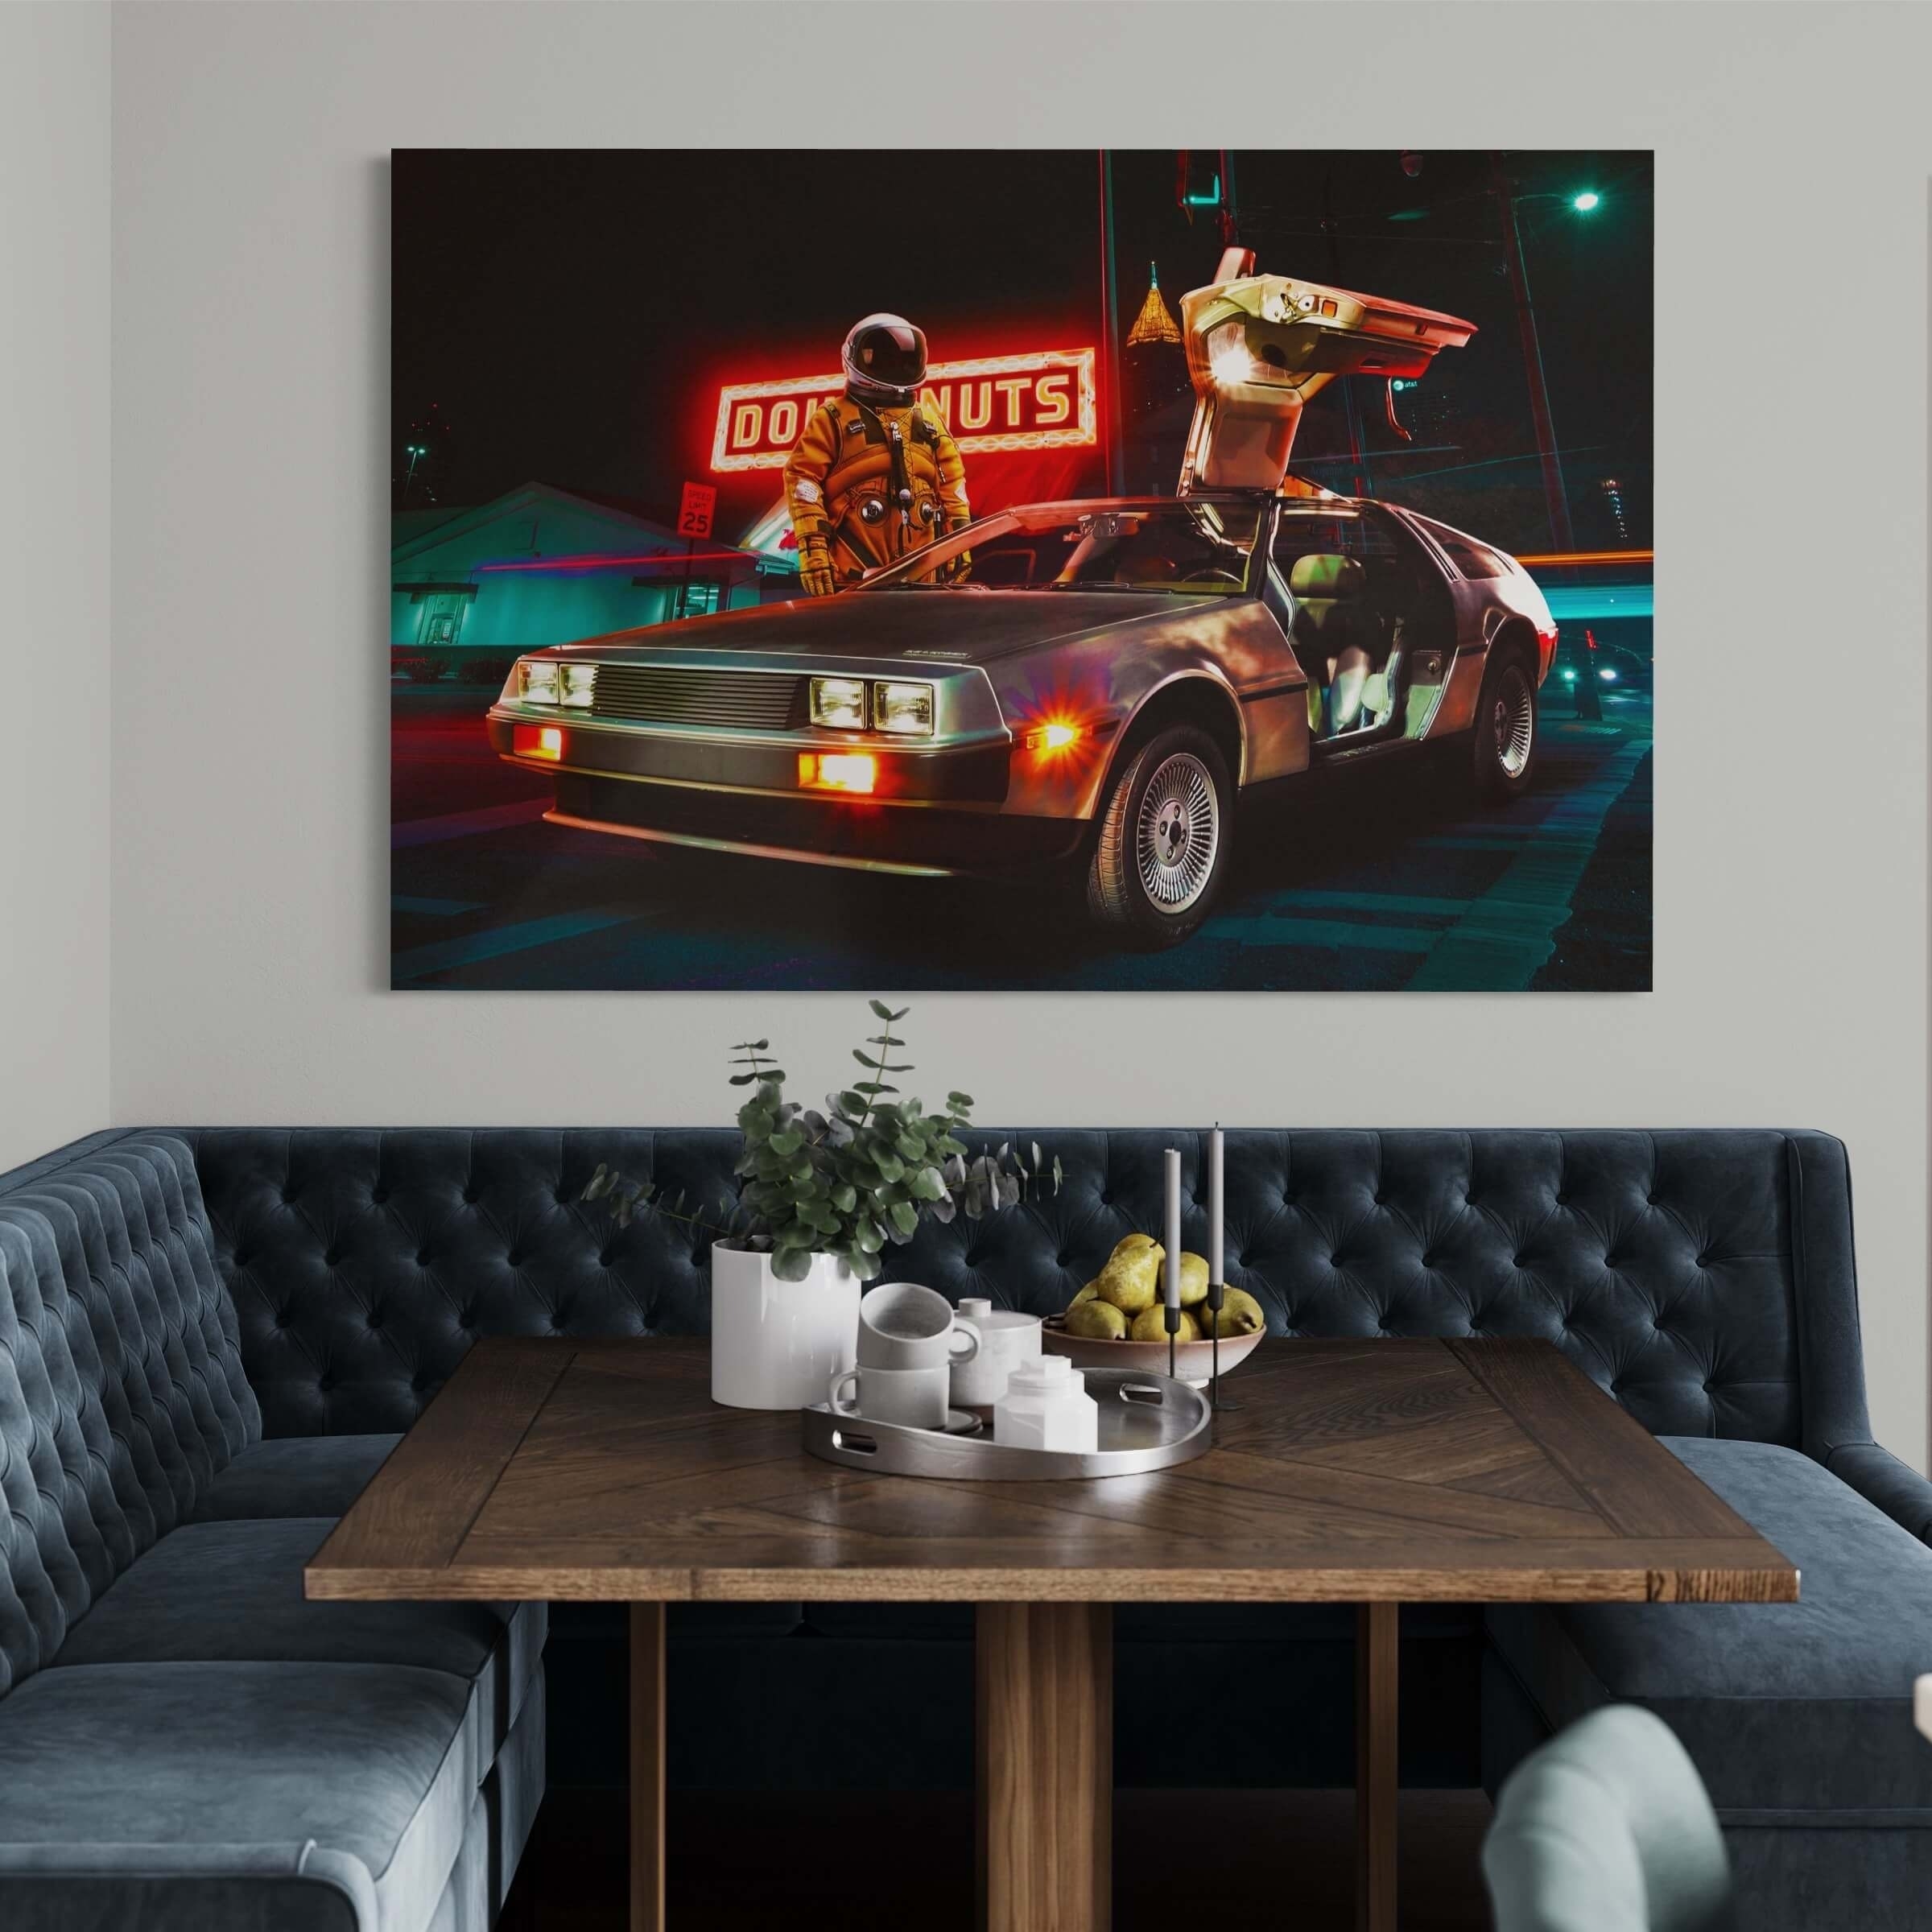 Wall art of a DeLorean car under neon lights with a figure holding a boombox, displayed above a couch